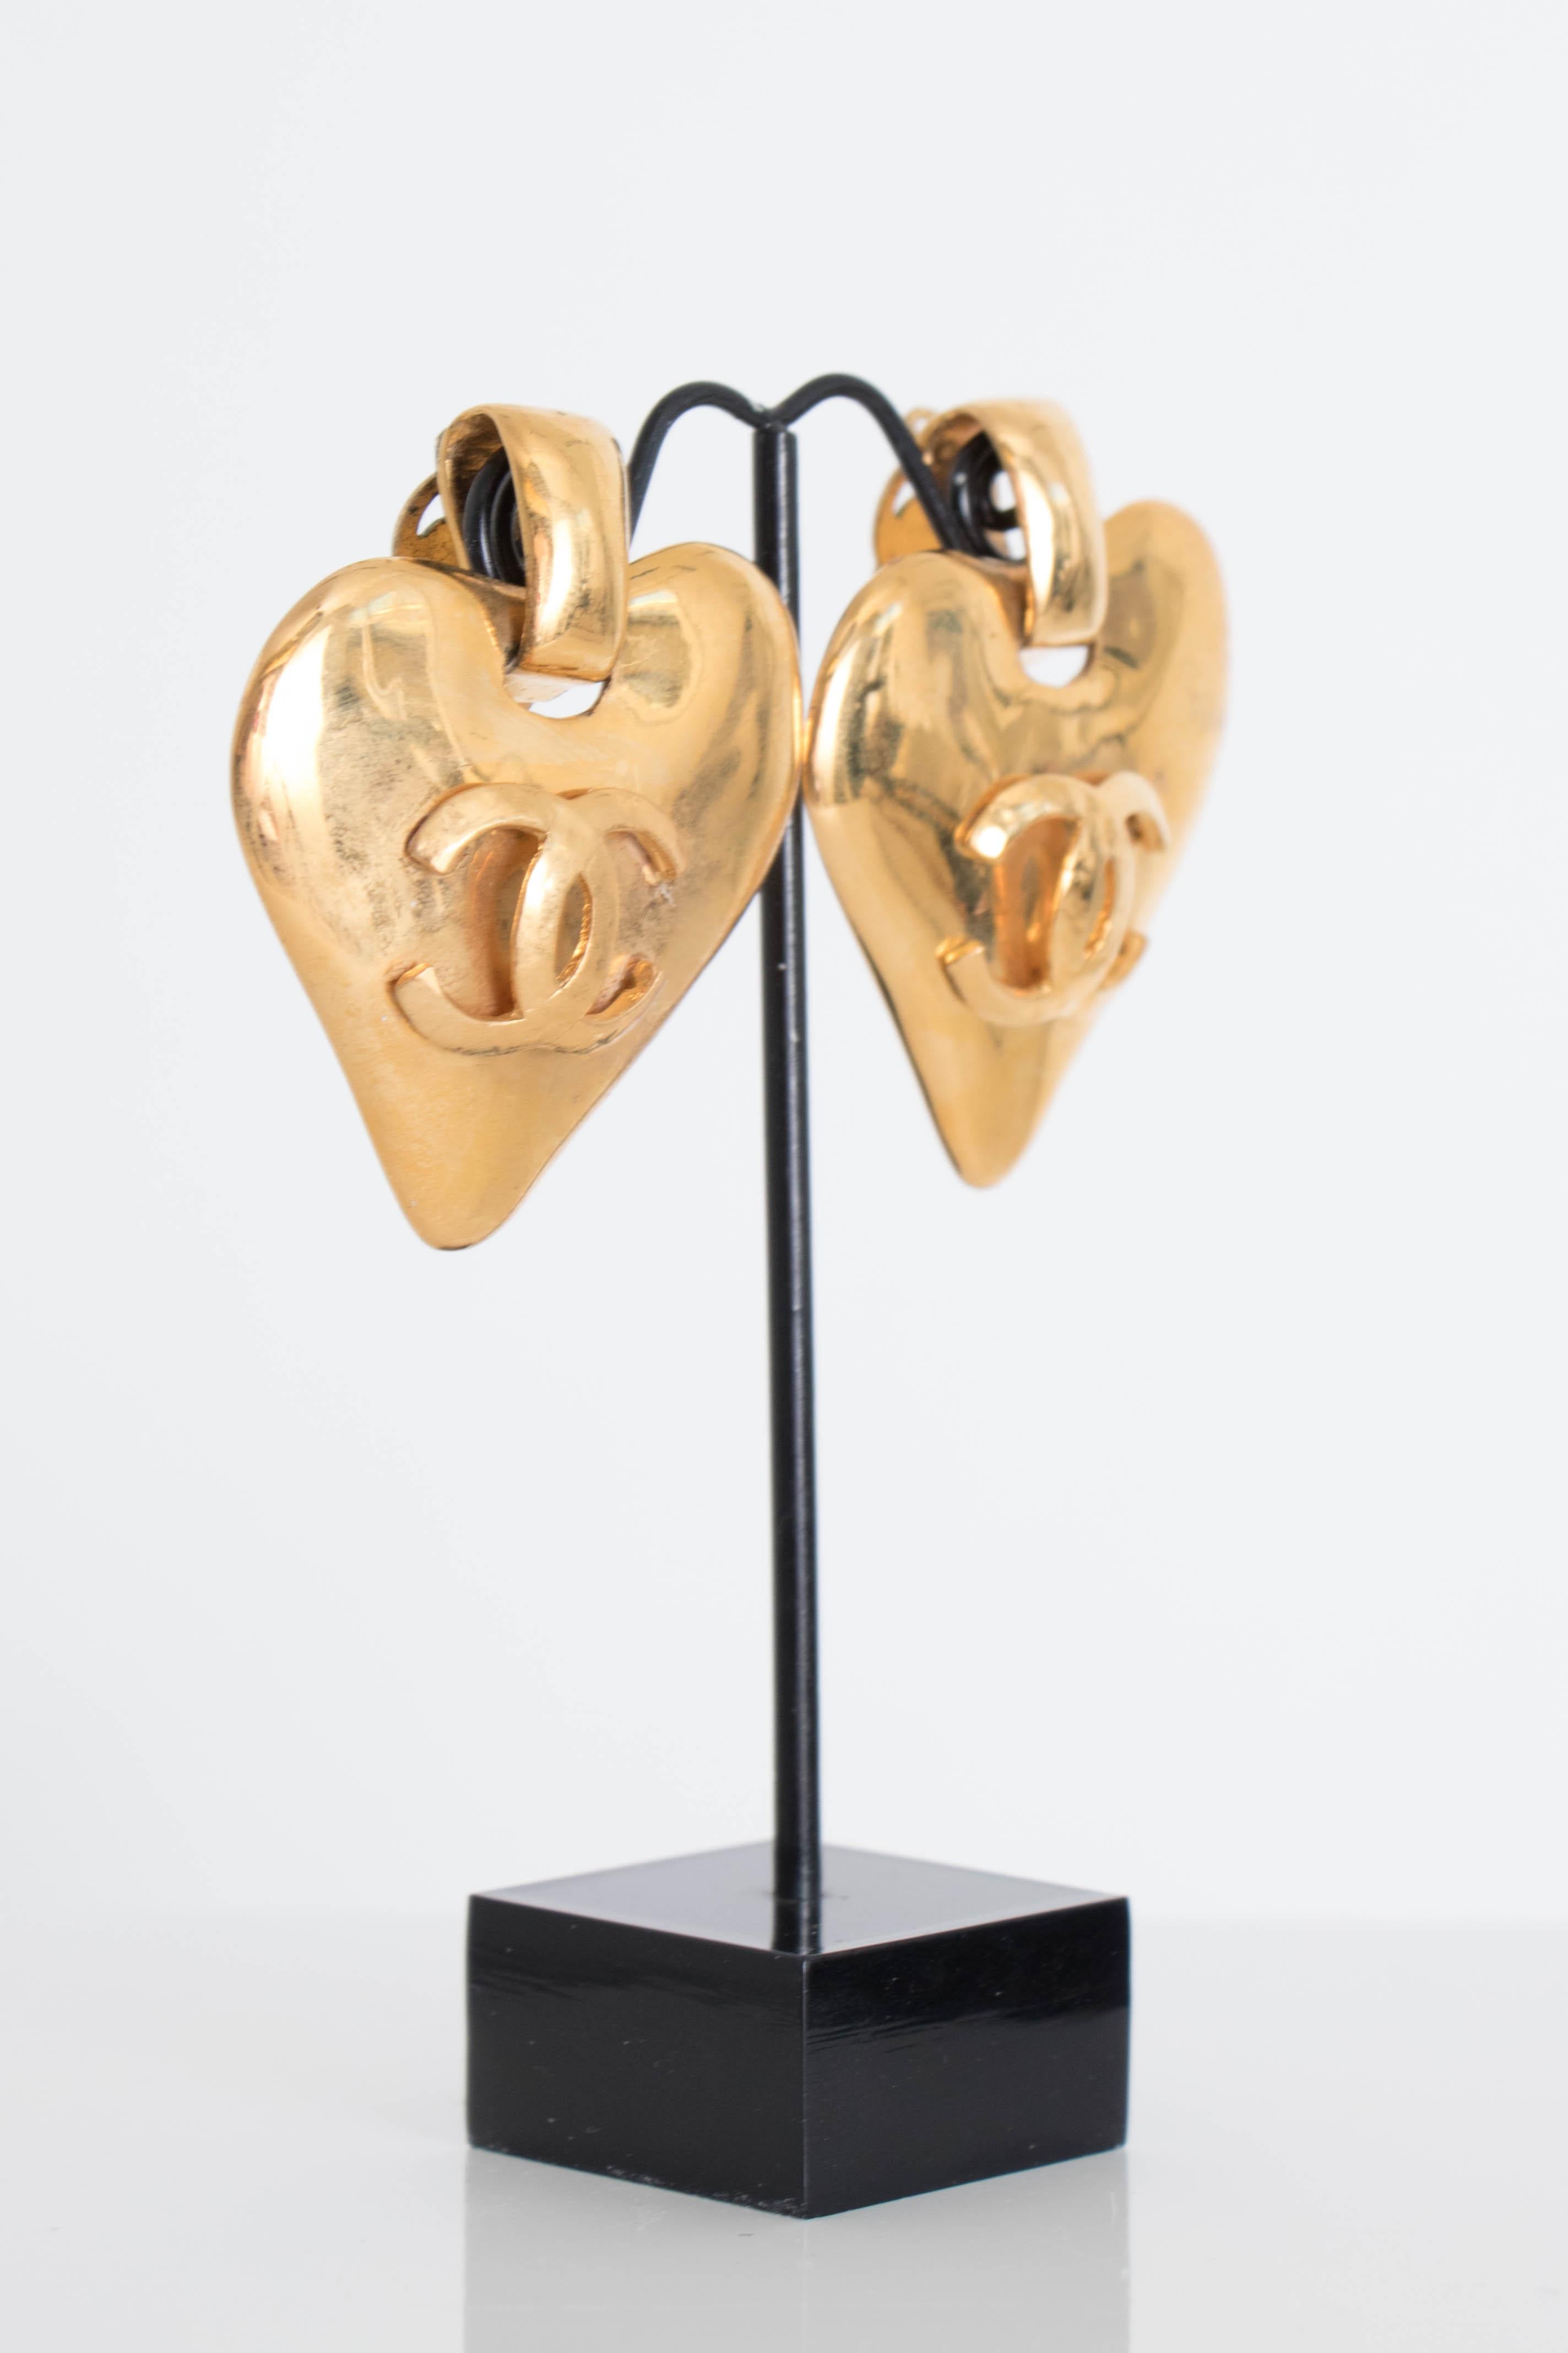 A pair of 1993 Chanel gold toned heart shaped pendant clip-on earrings with a Chanel double 'C' logo in the centre front.

The earrings are stamped: Chanel, 93, P, Made in France

The earrings measure:
Length: 5 cm
Width: 4.5 cm